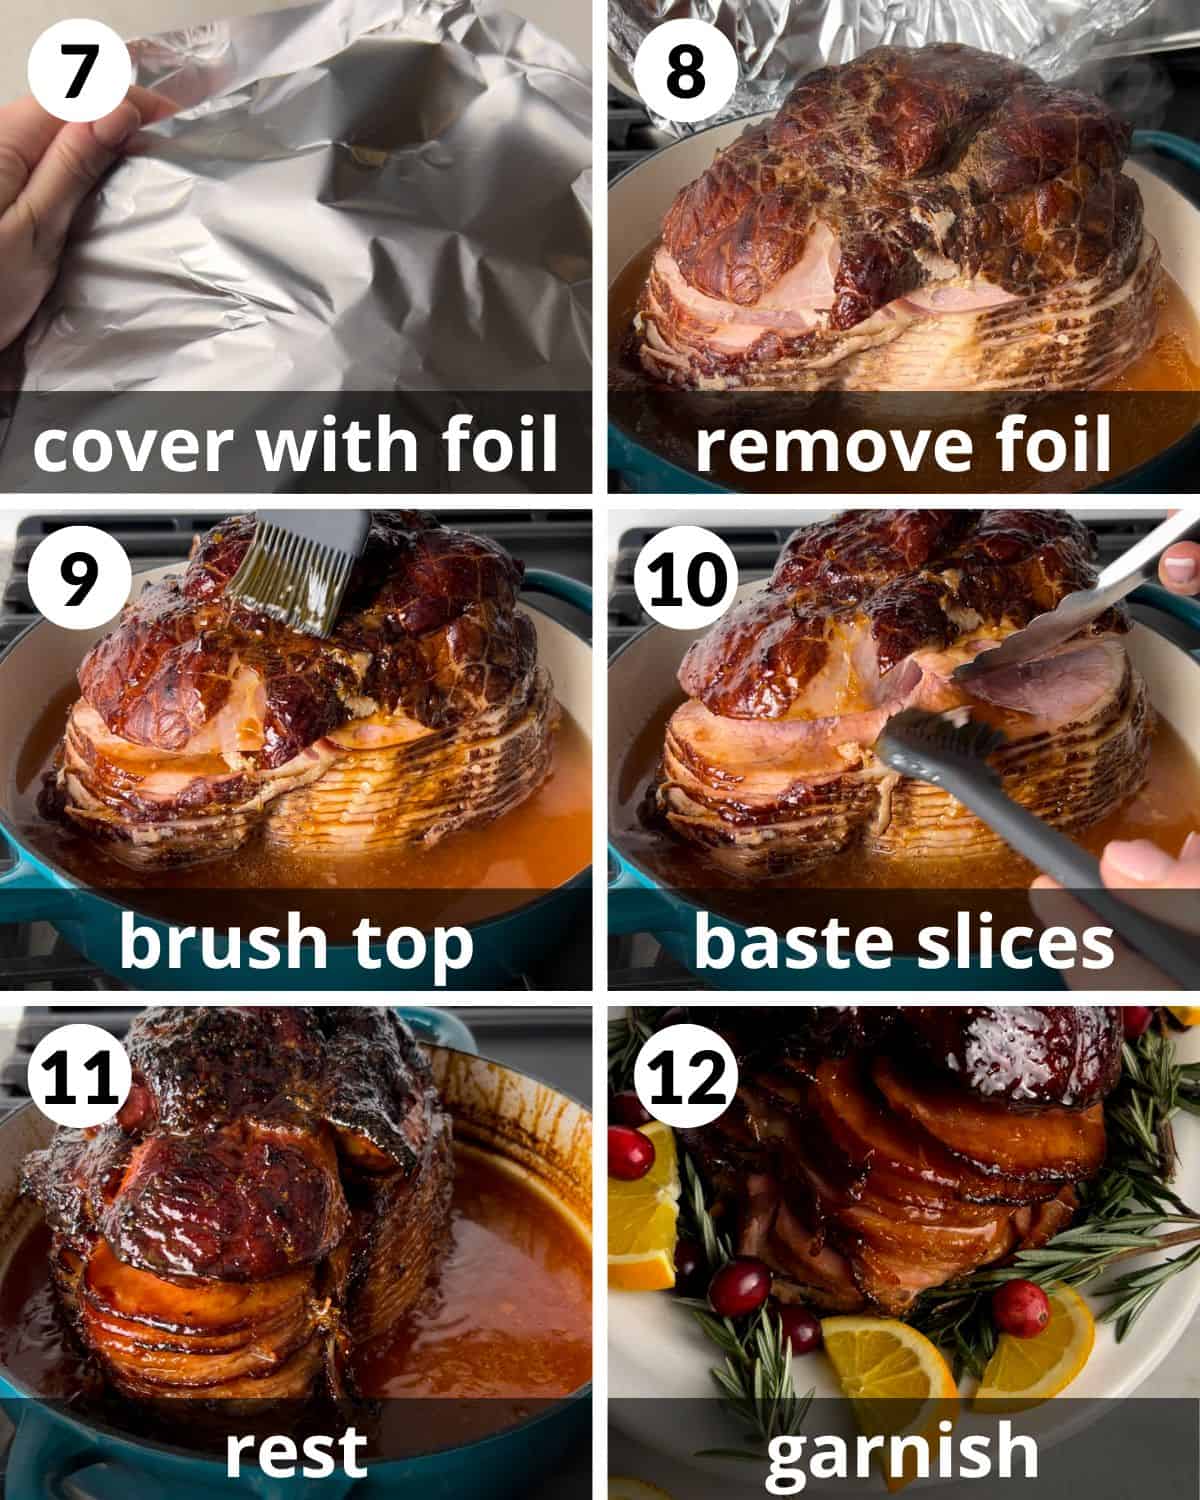 A 6 photo collage showing the final steps to cook spiral ham. 